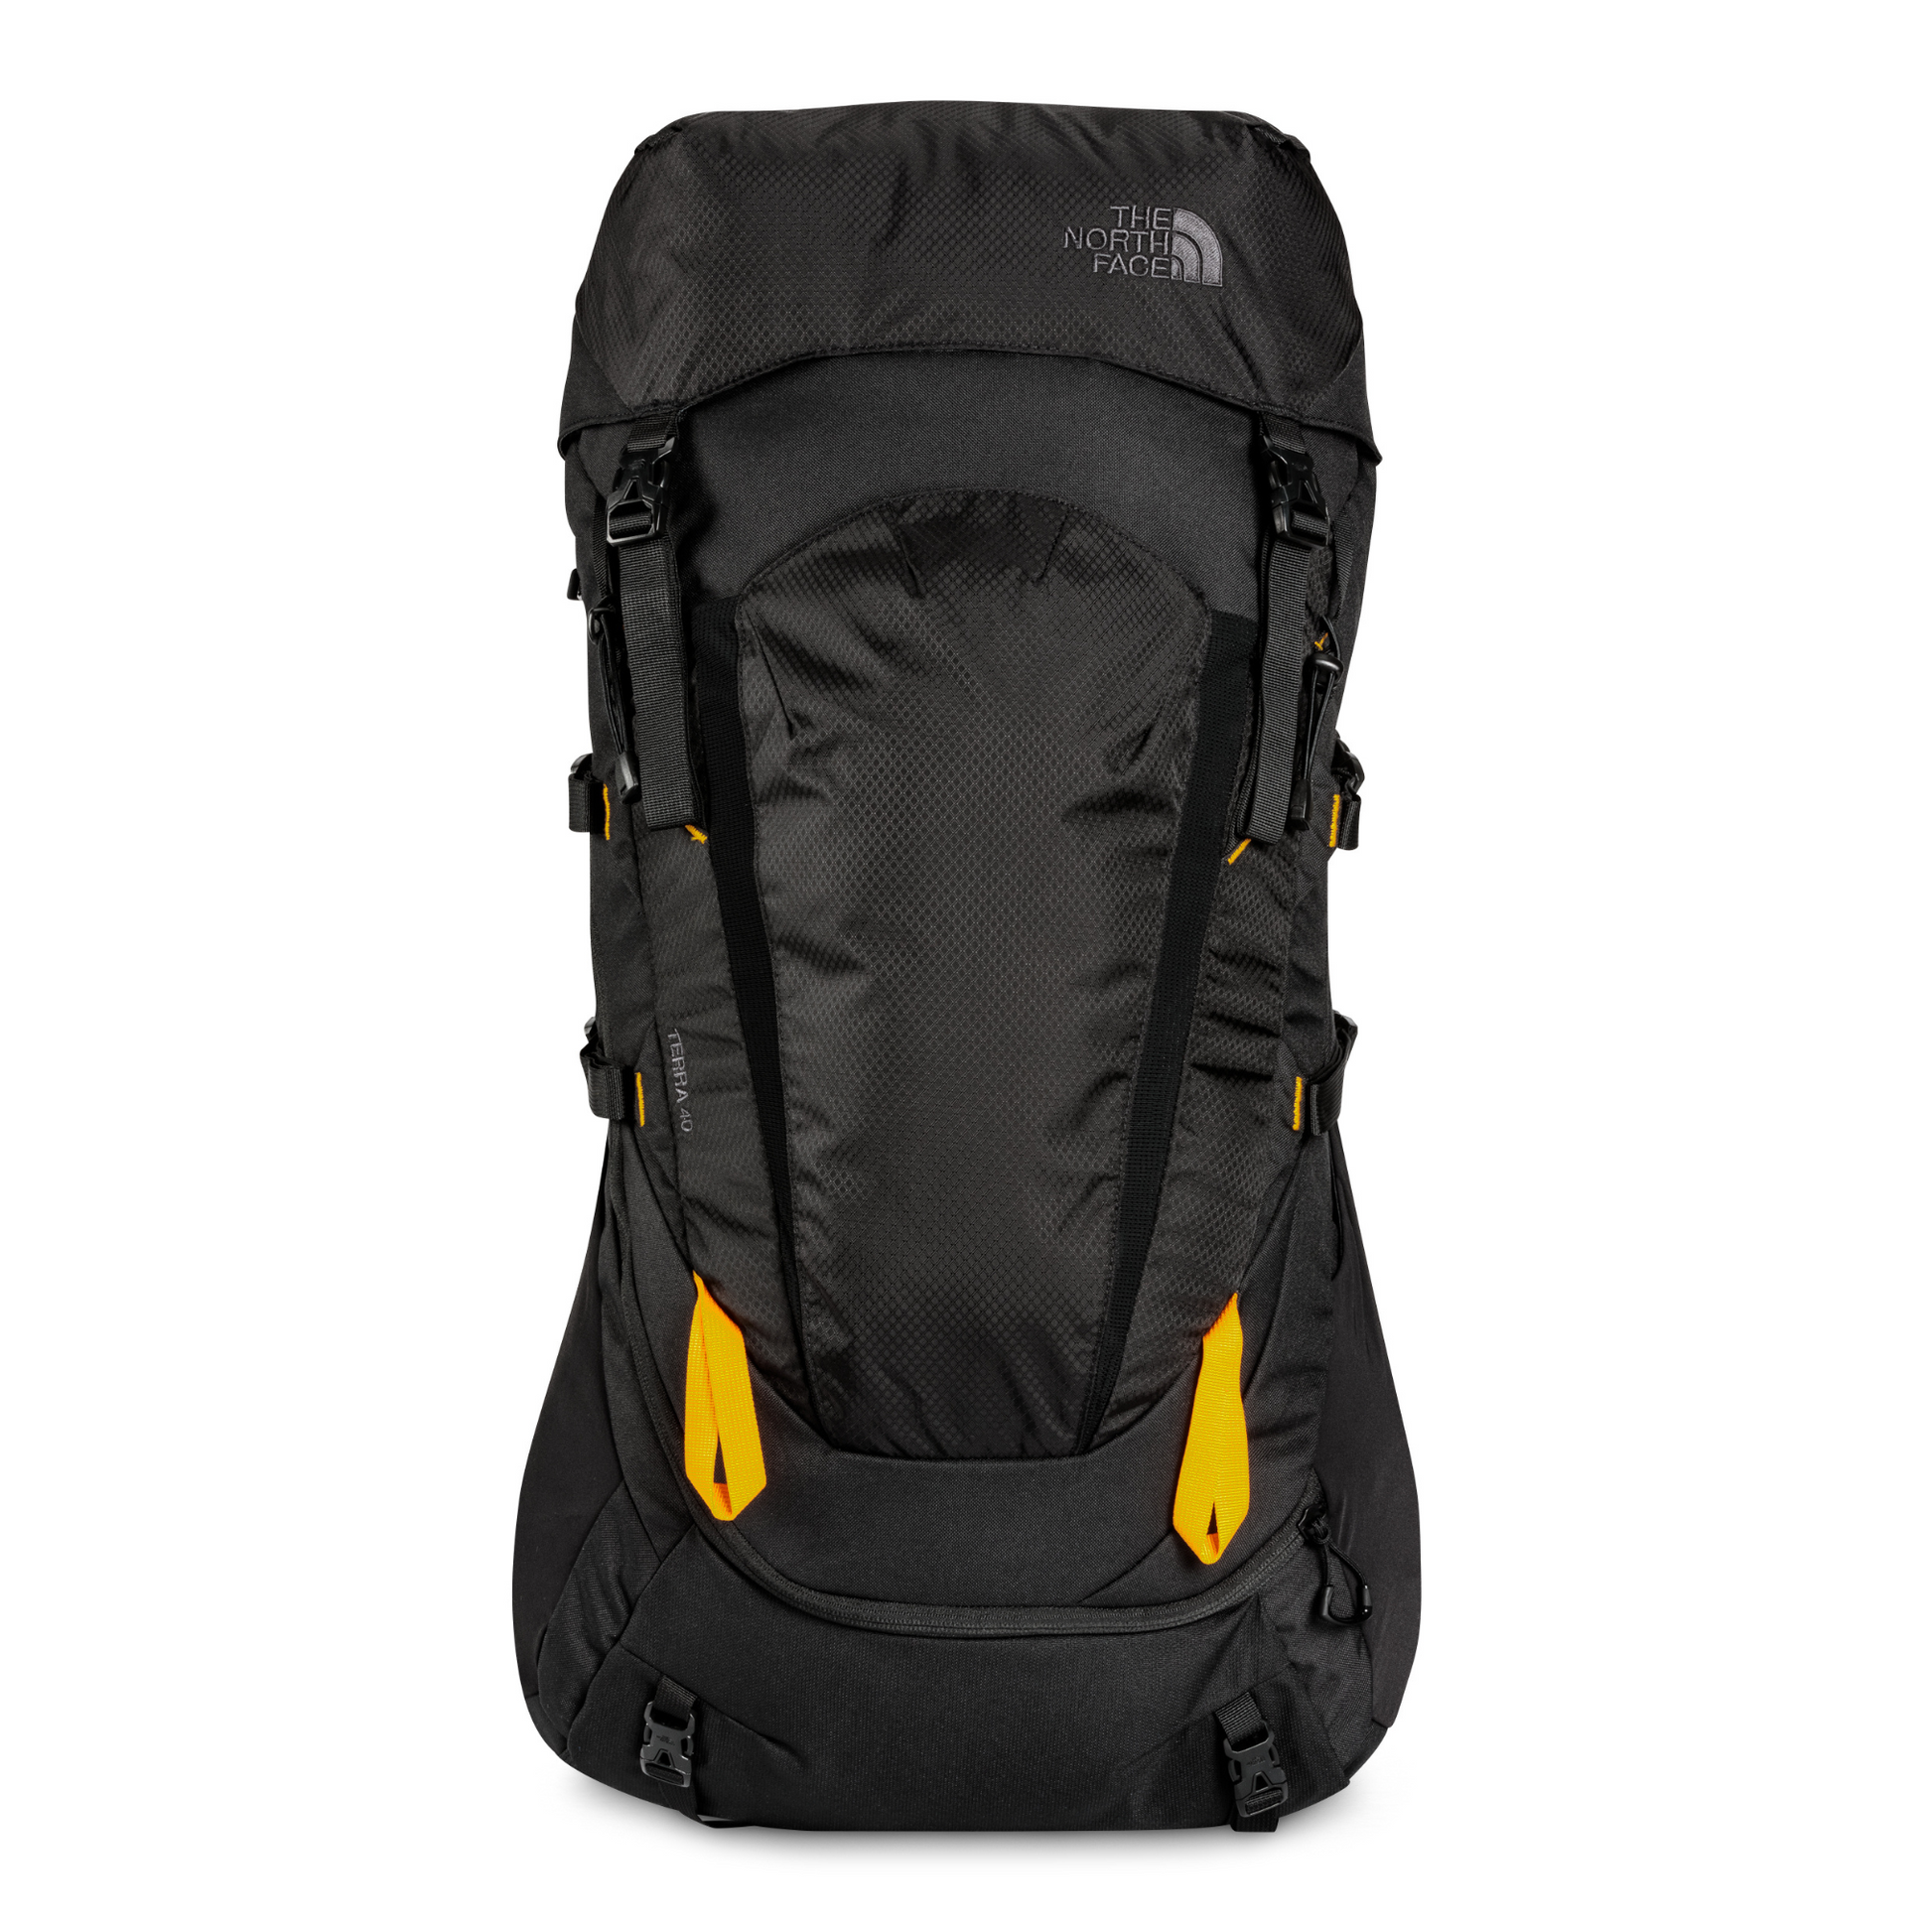 Morral Terra 55 The North Face Negro | Outdoor Adventure Colombia